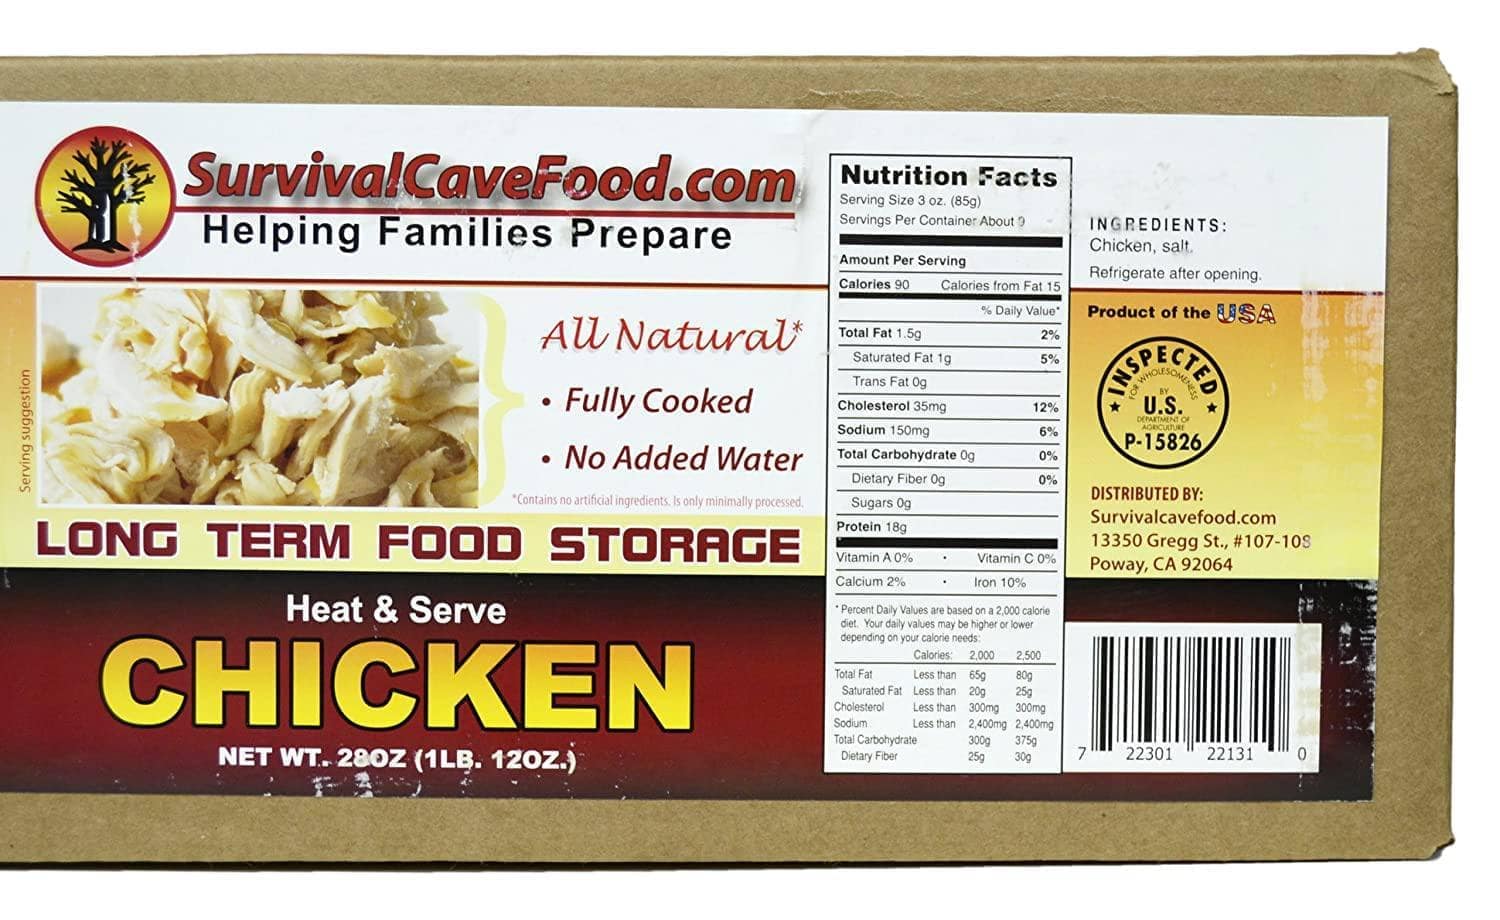 survival-food-freeze-dried-food-survival-cave-food-scfck-canned-chicken-12-cans-1-case-28642150973522.jpg